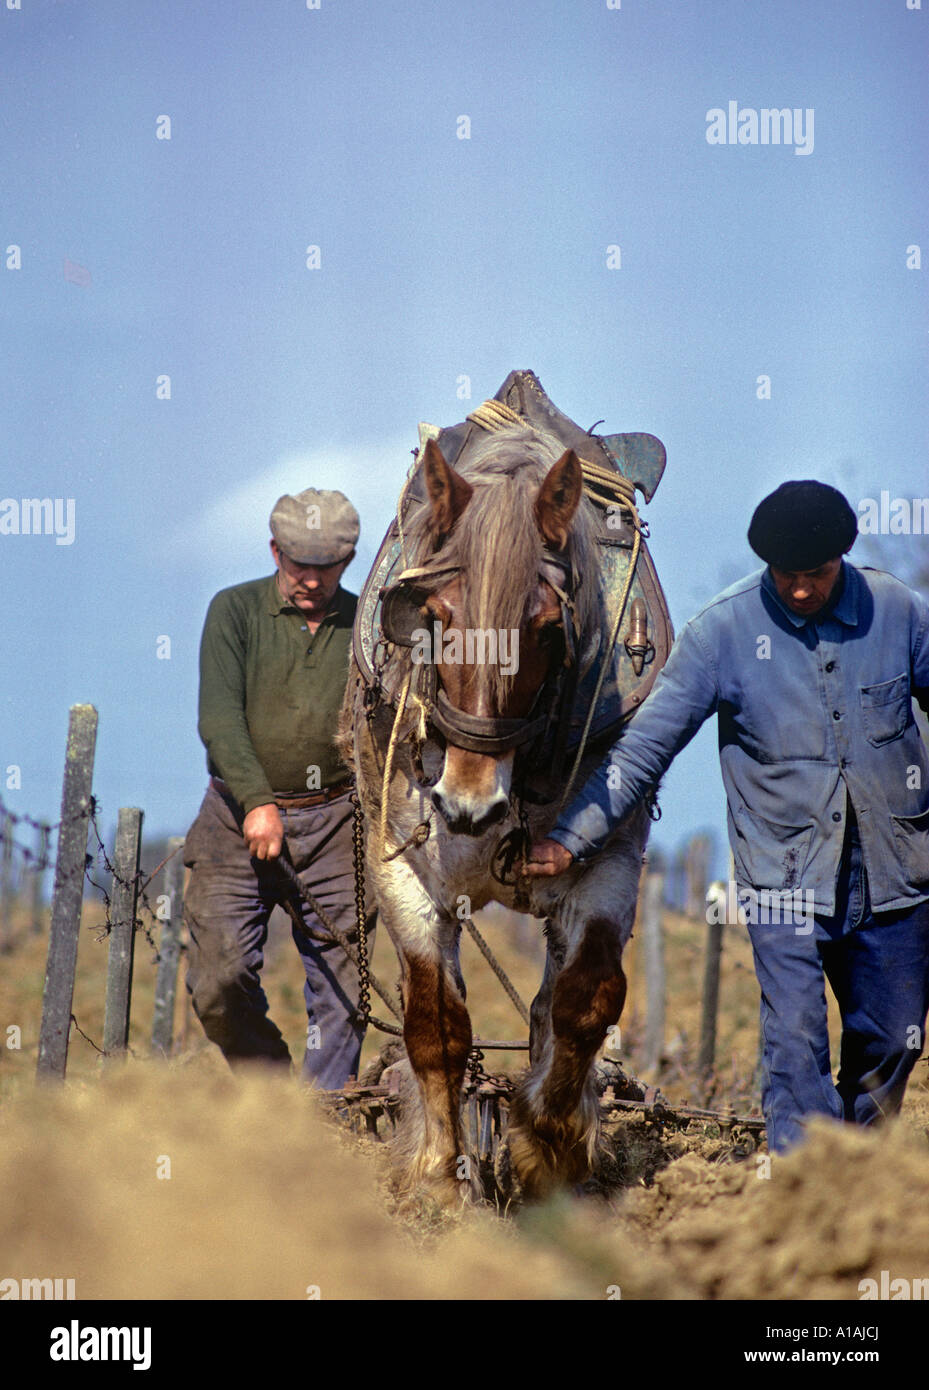 French farmer in typical working dress leads his plough horse carefully between rows of vines Stock Photo